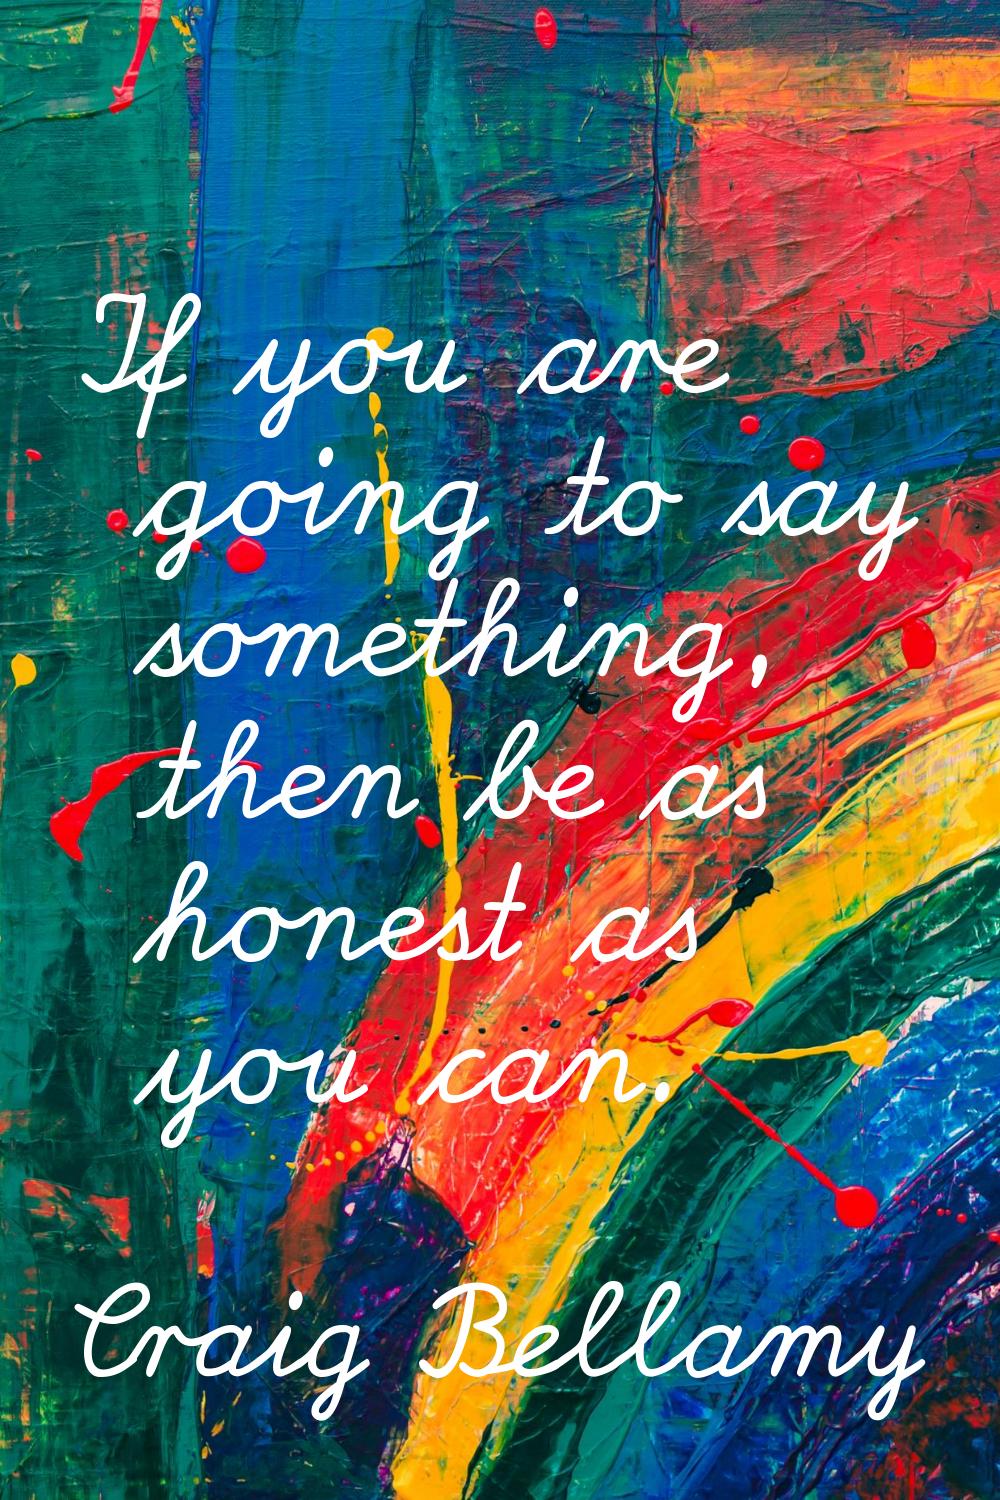 If you are going to say something, then be as honest as you can.